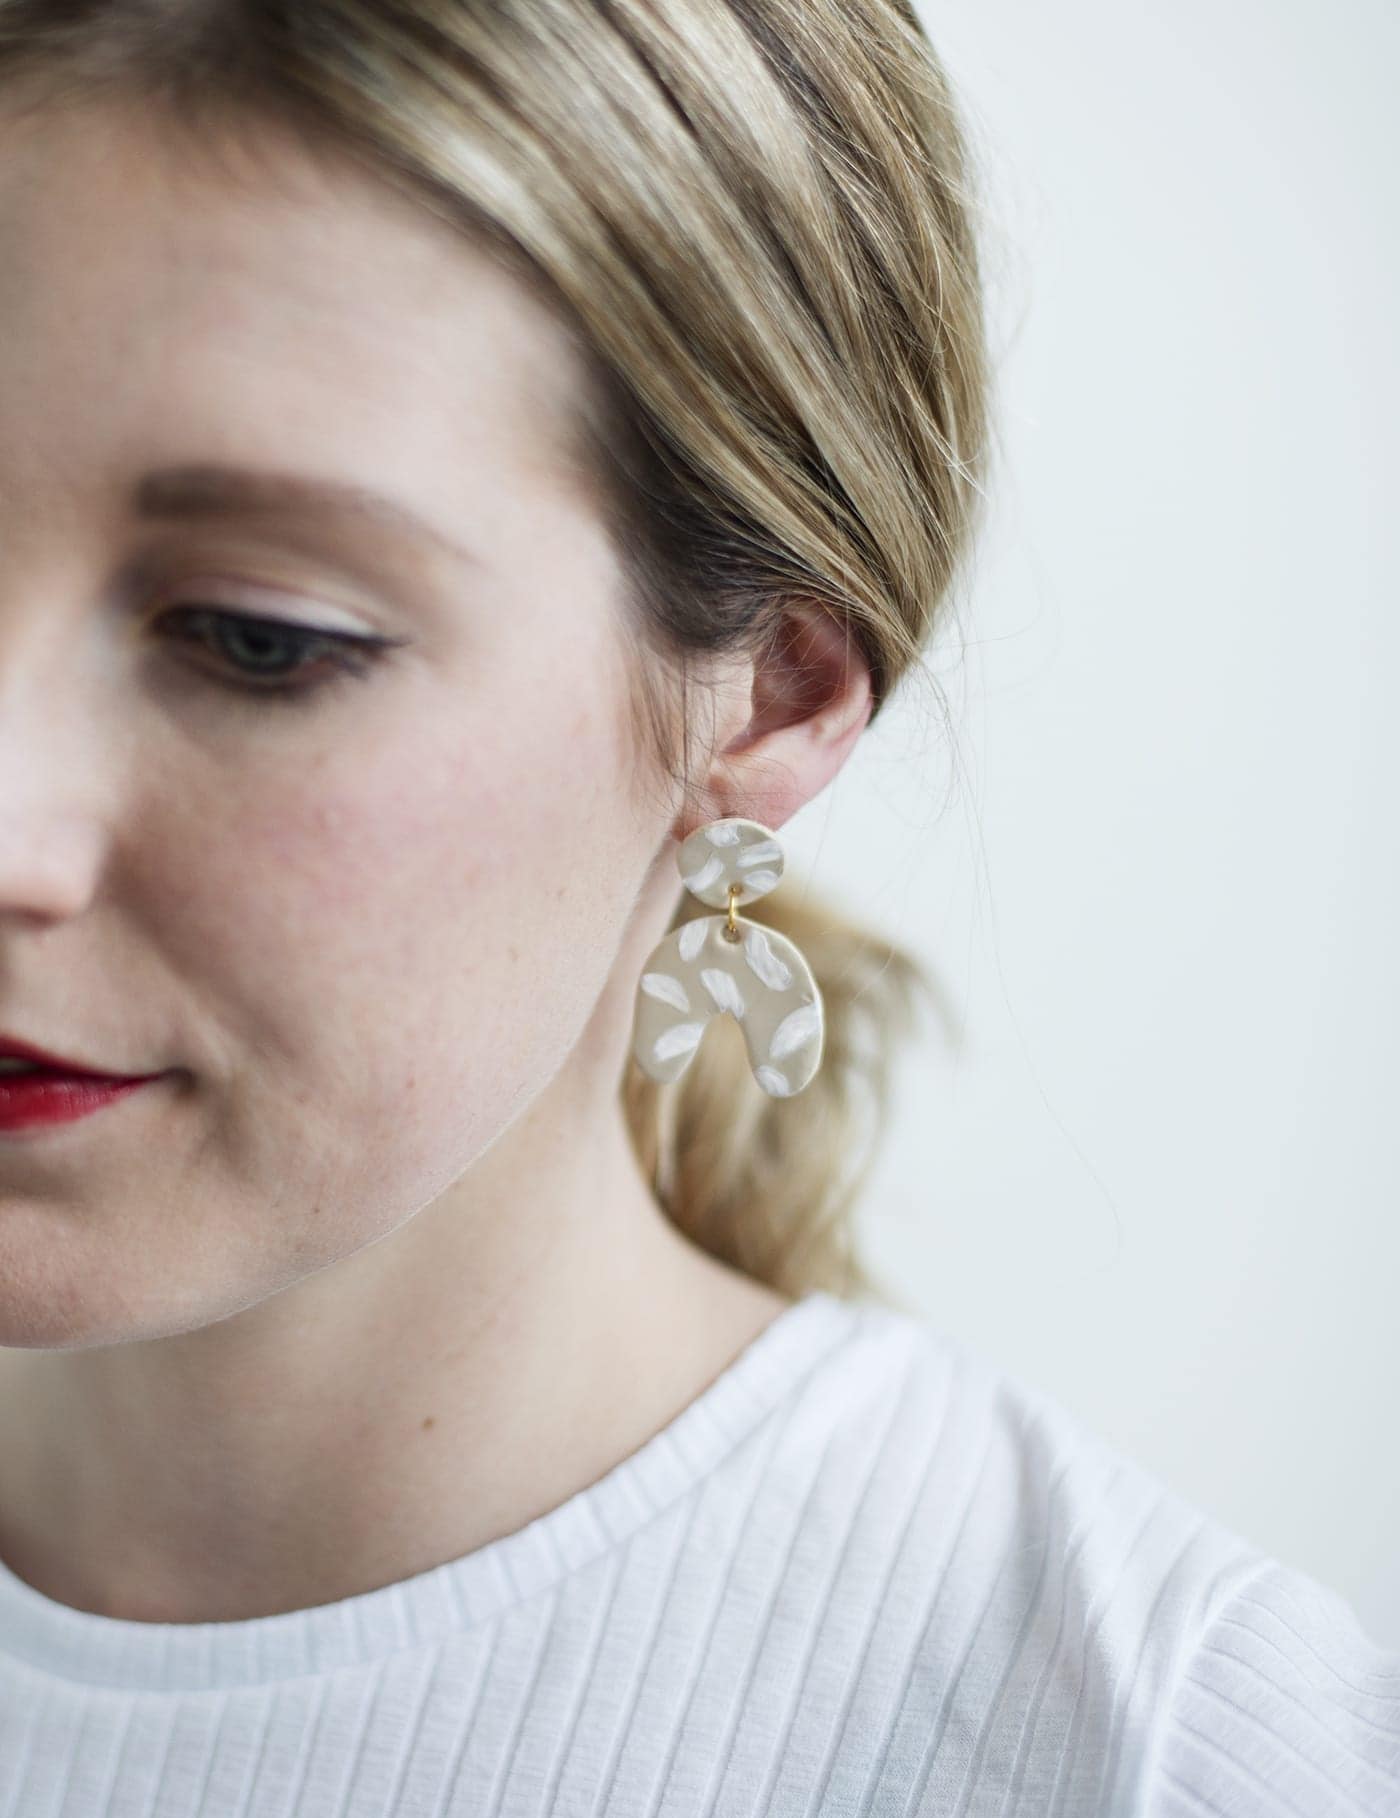 Abstract Shapes: Make Your Own Earrings